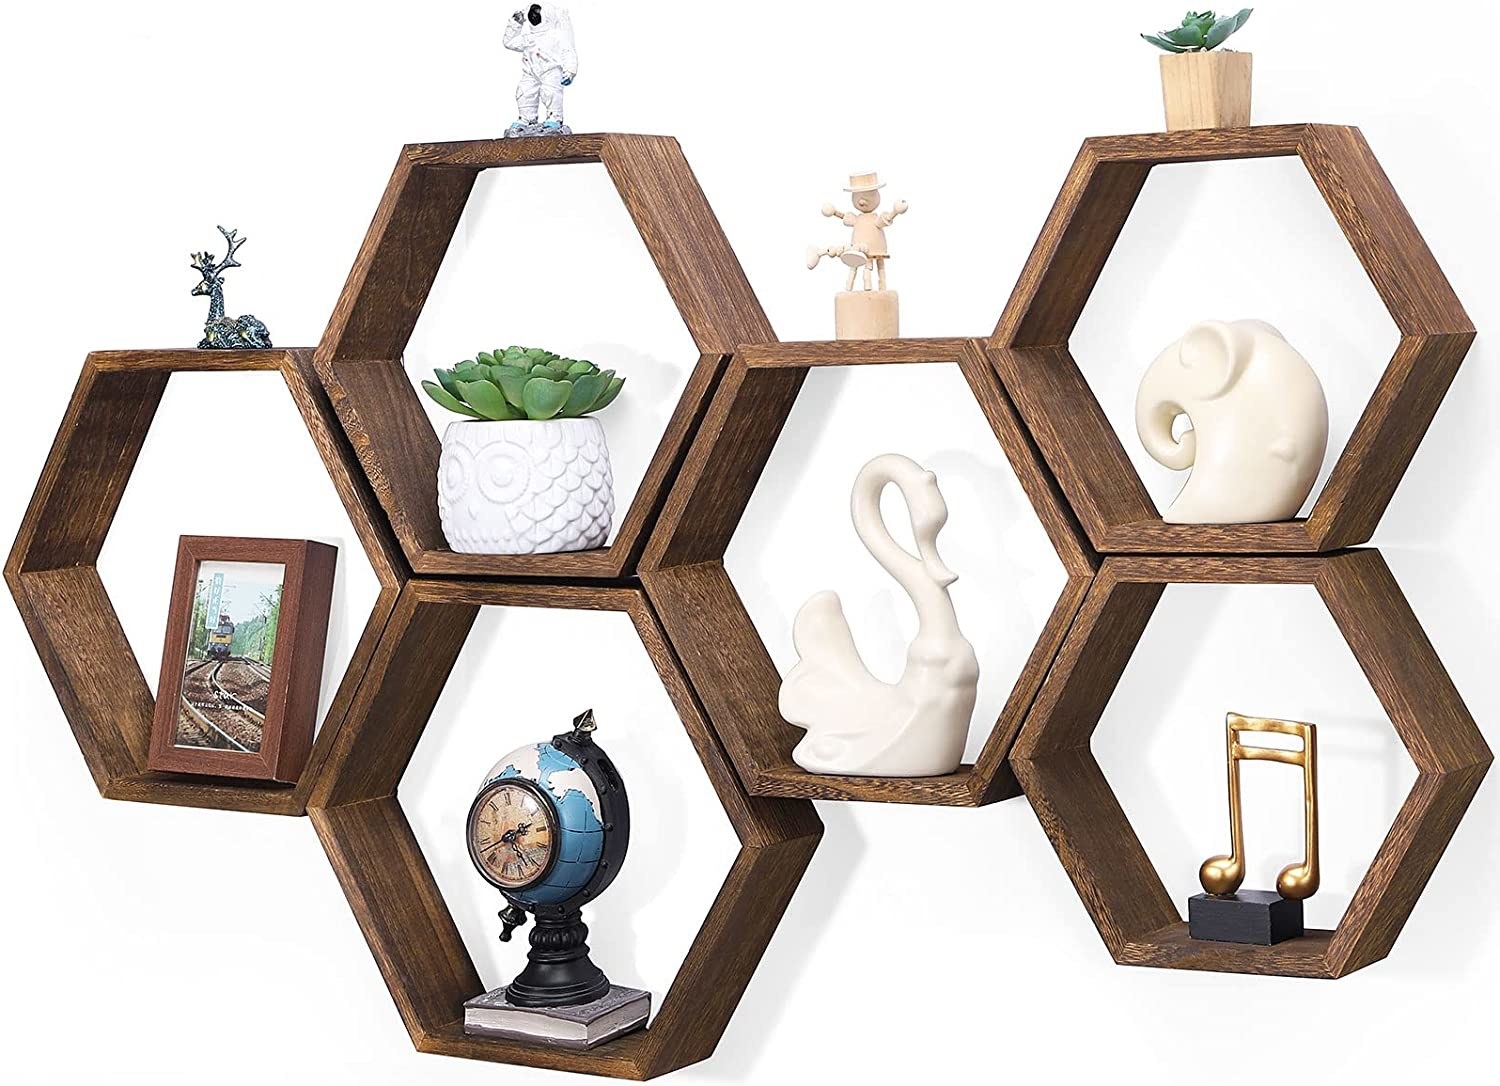 Six wooden hexagon shelves that fit together like a honeycomb